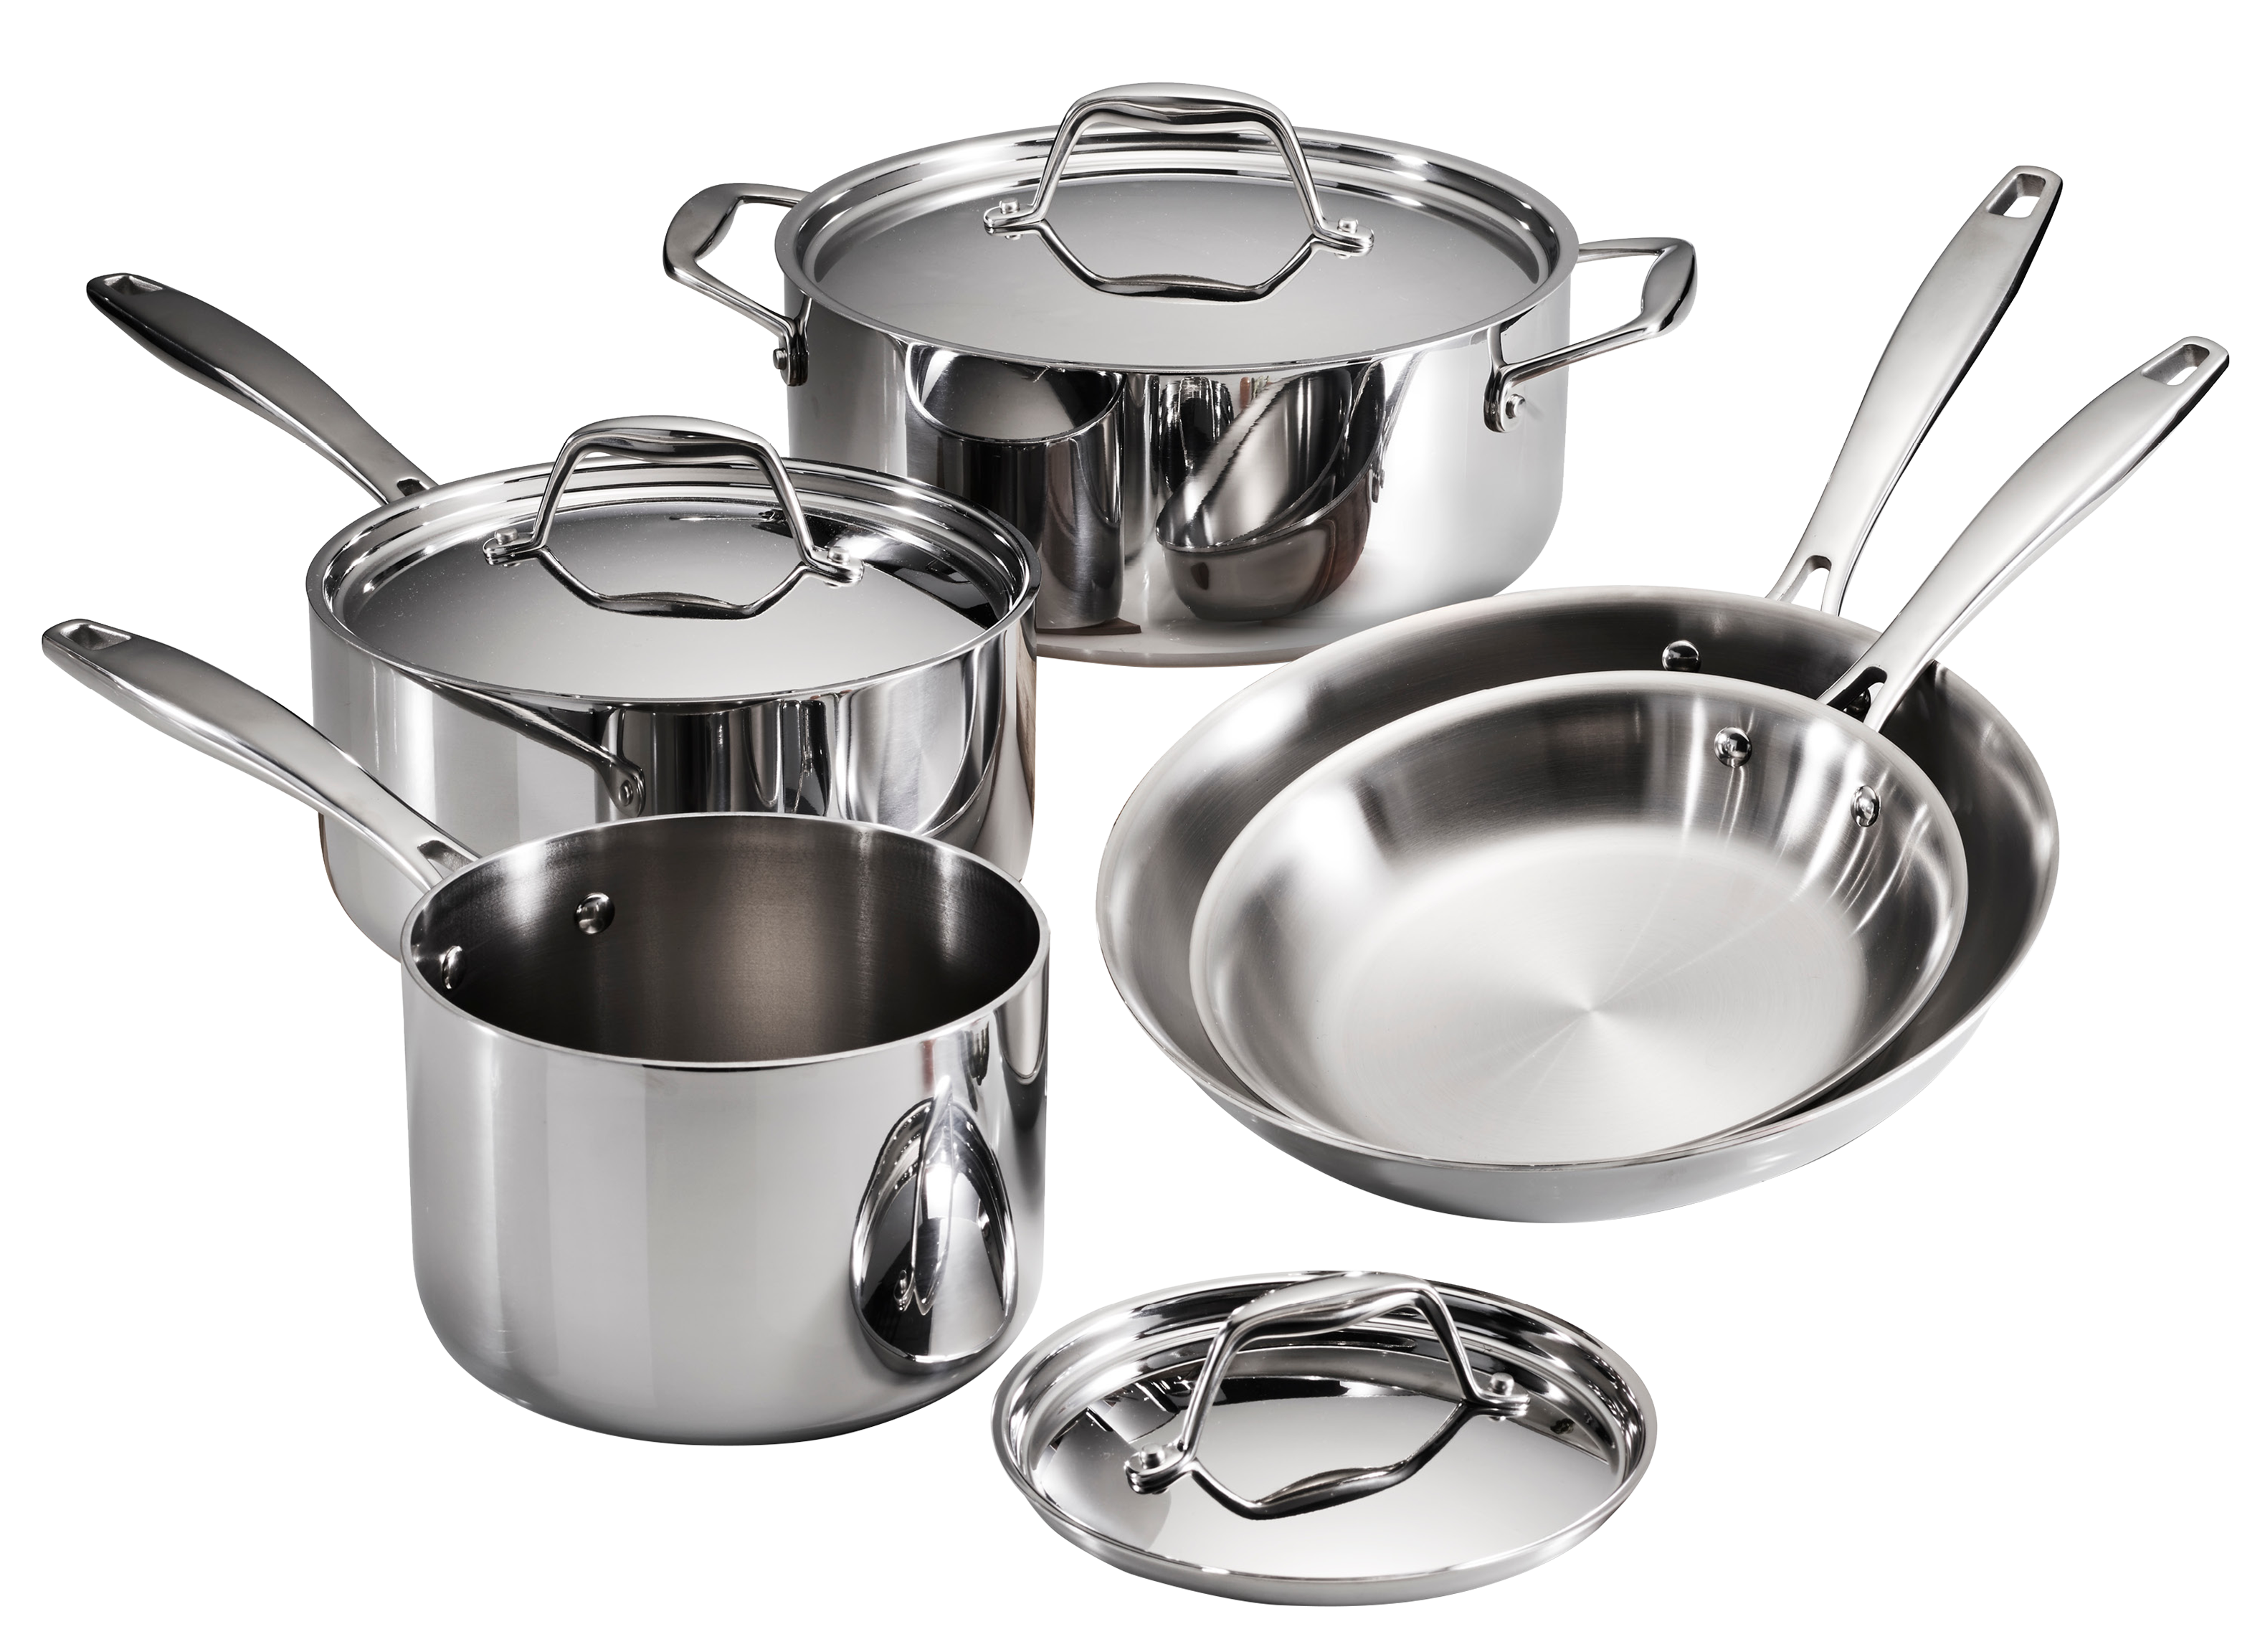 Tramontina Tri-Ply Clad Cookware Review - Consumer Reports